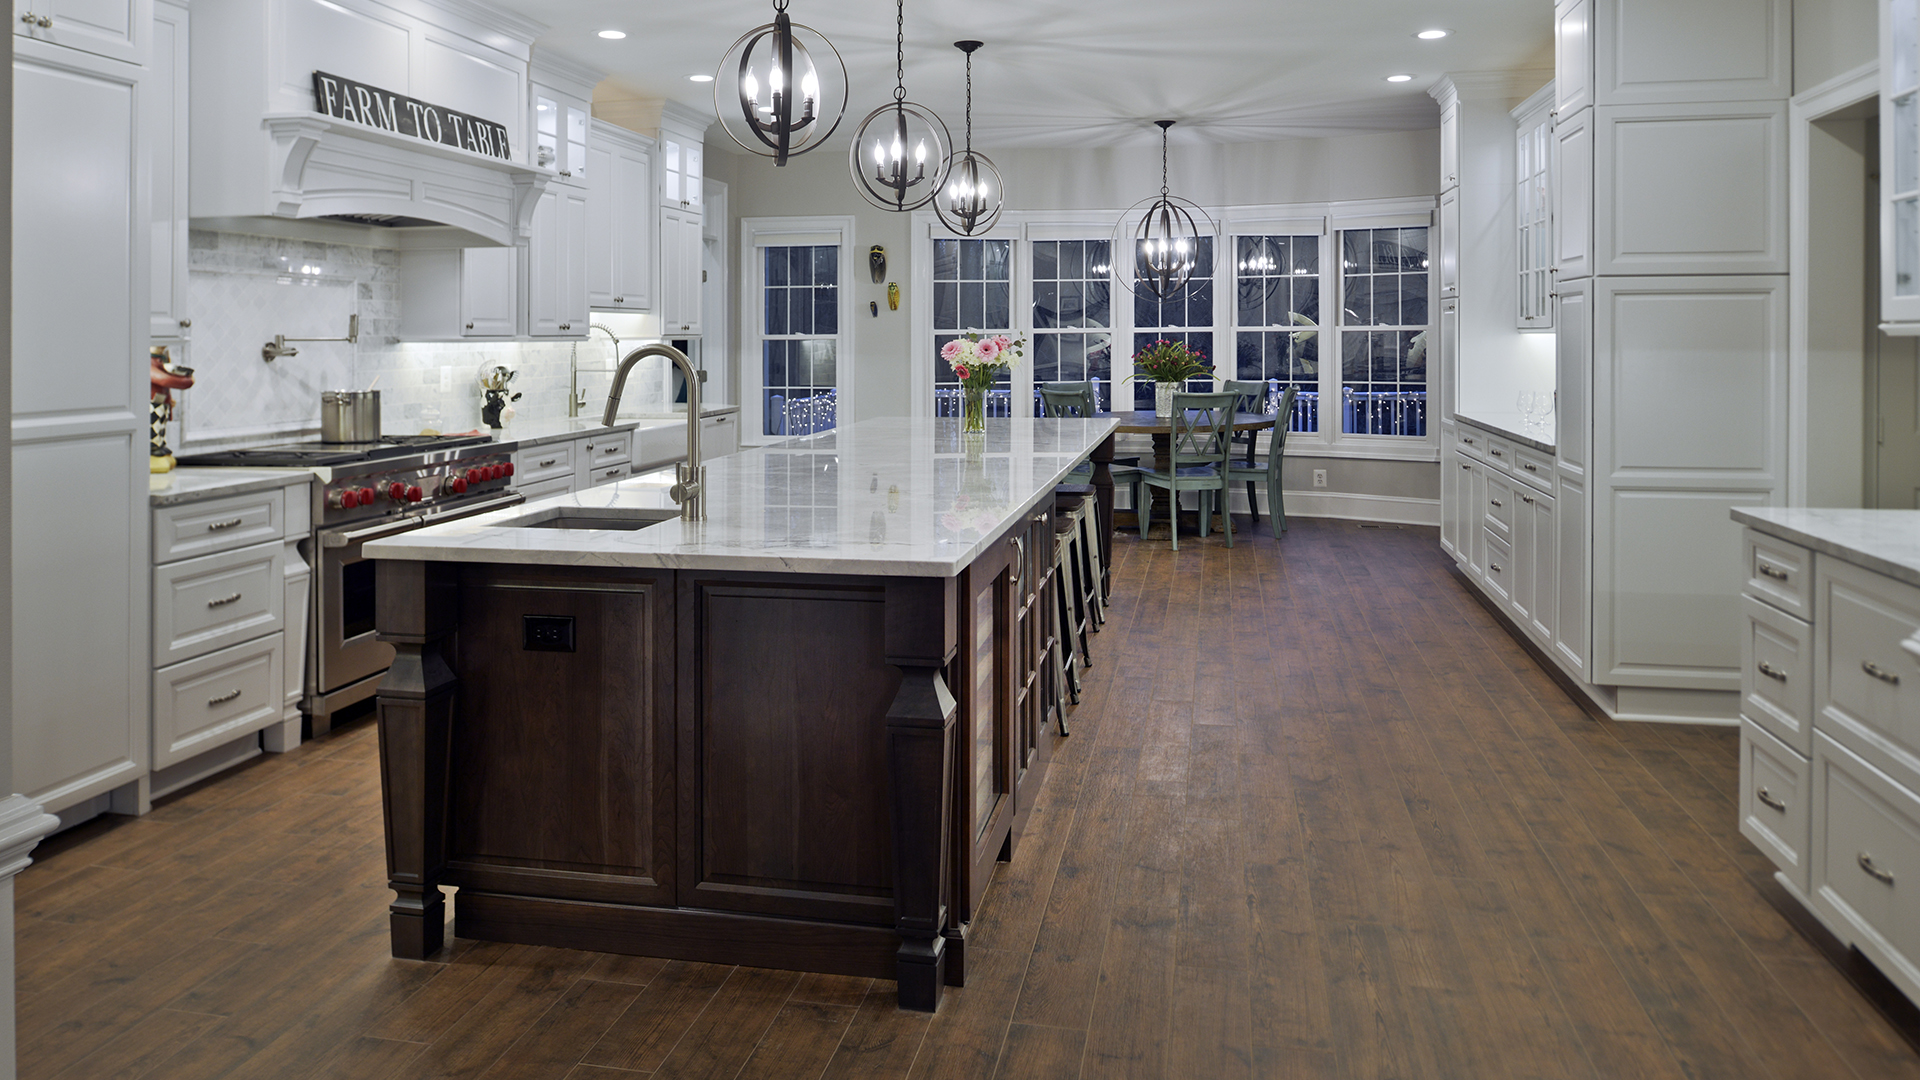 2020 Best in American Living Award Kitchen, over $125,000